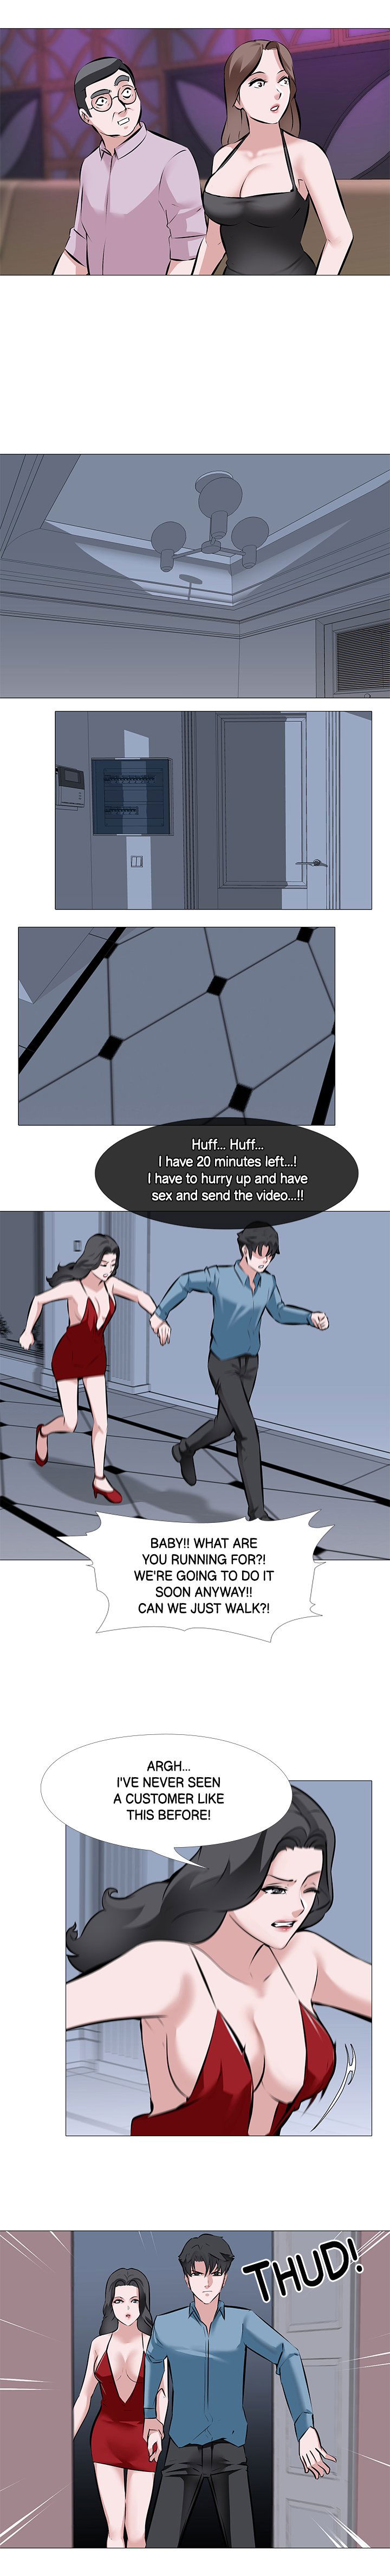 wife-game-chap-2-12